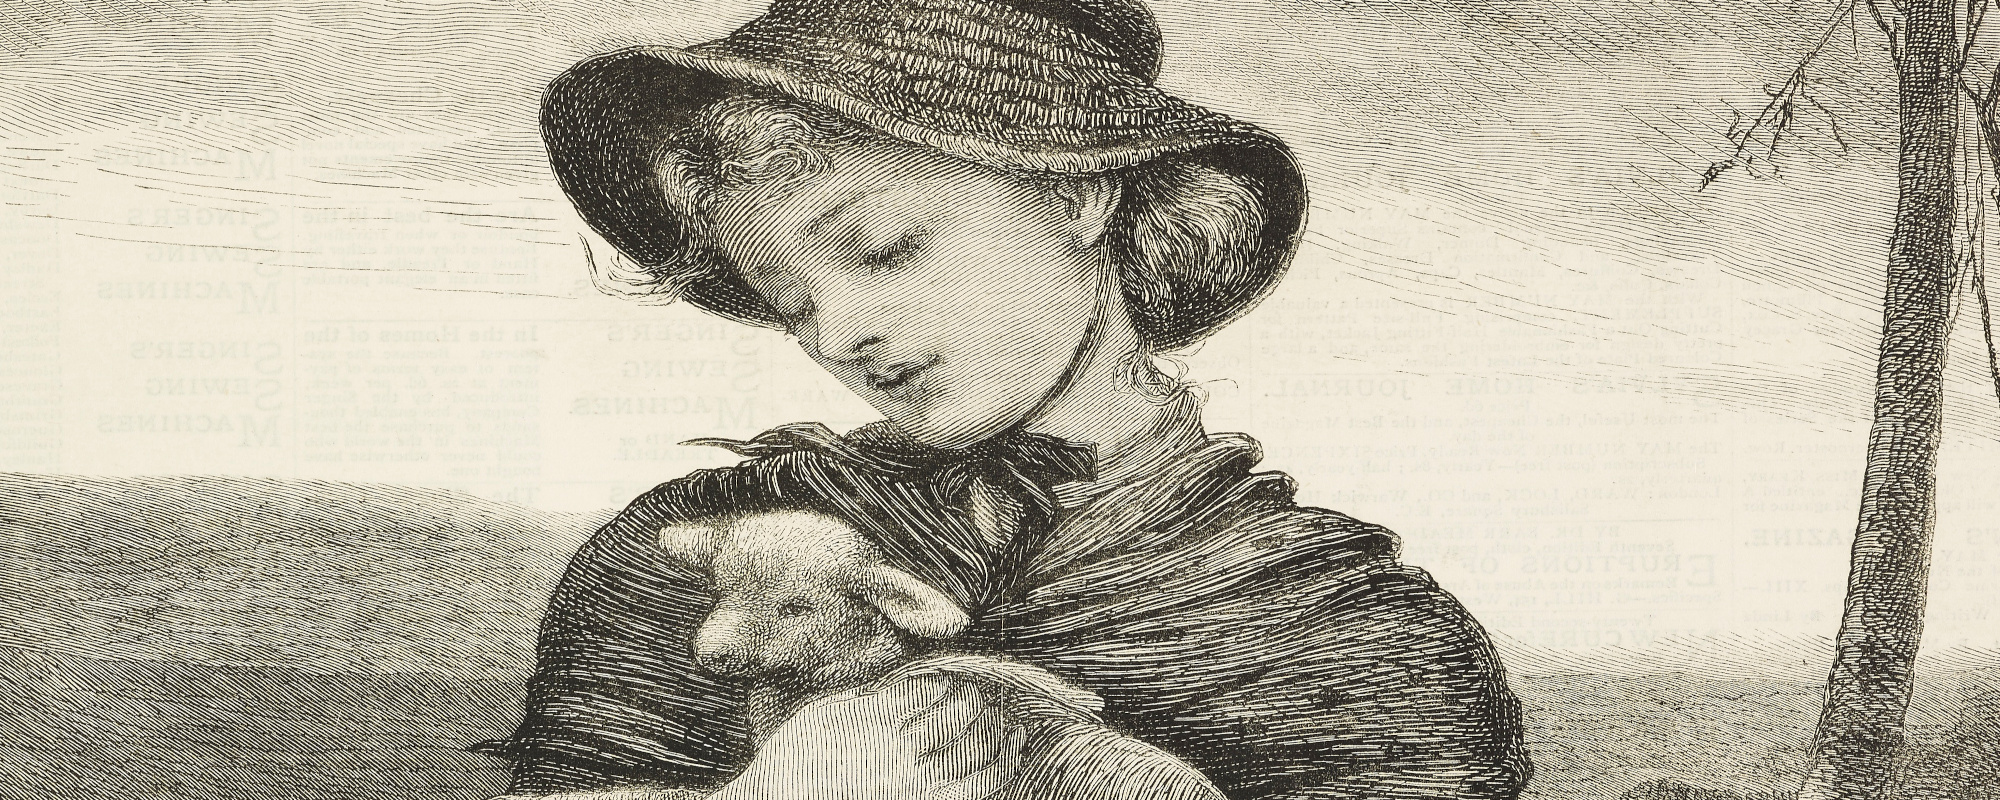 Behind the Meaning of the Traditional Nursery Rhyme “Mary Had a Little Lamb”